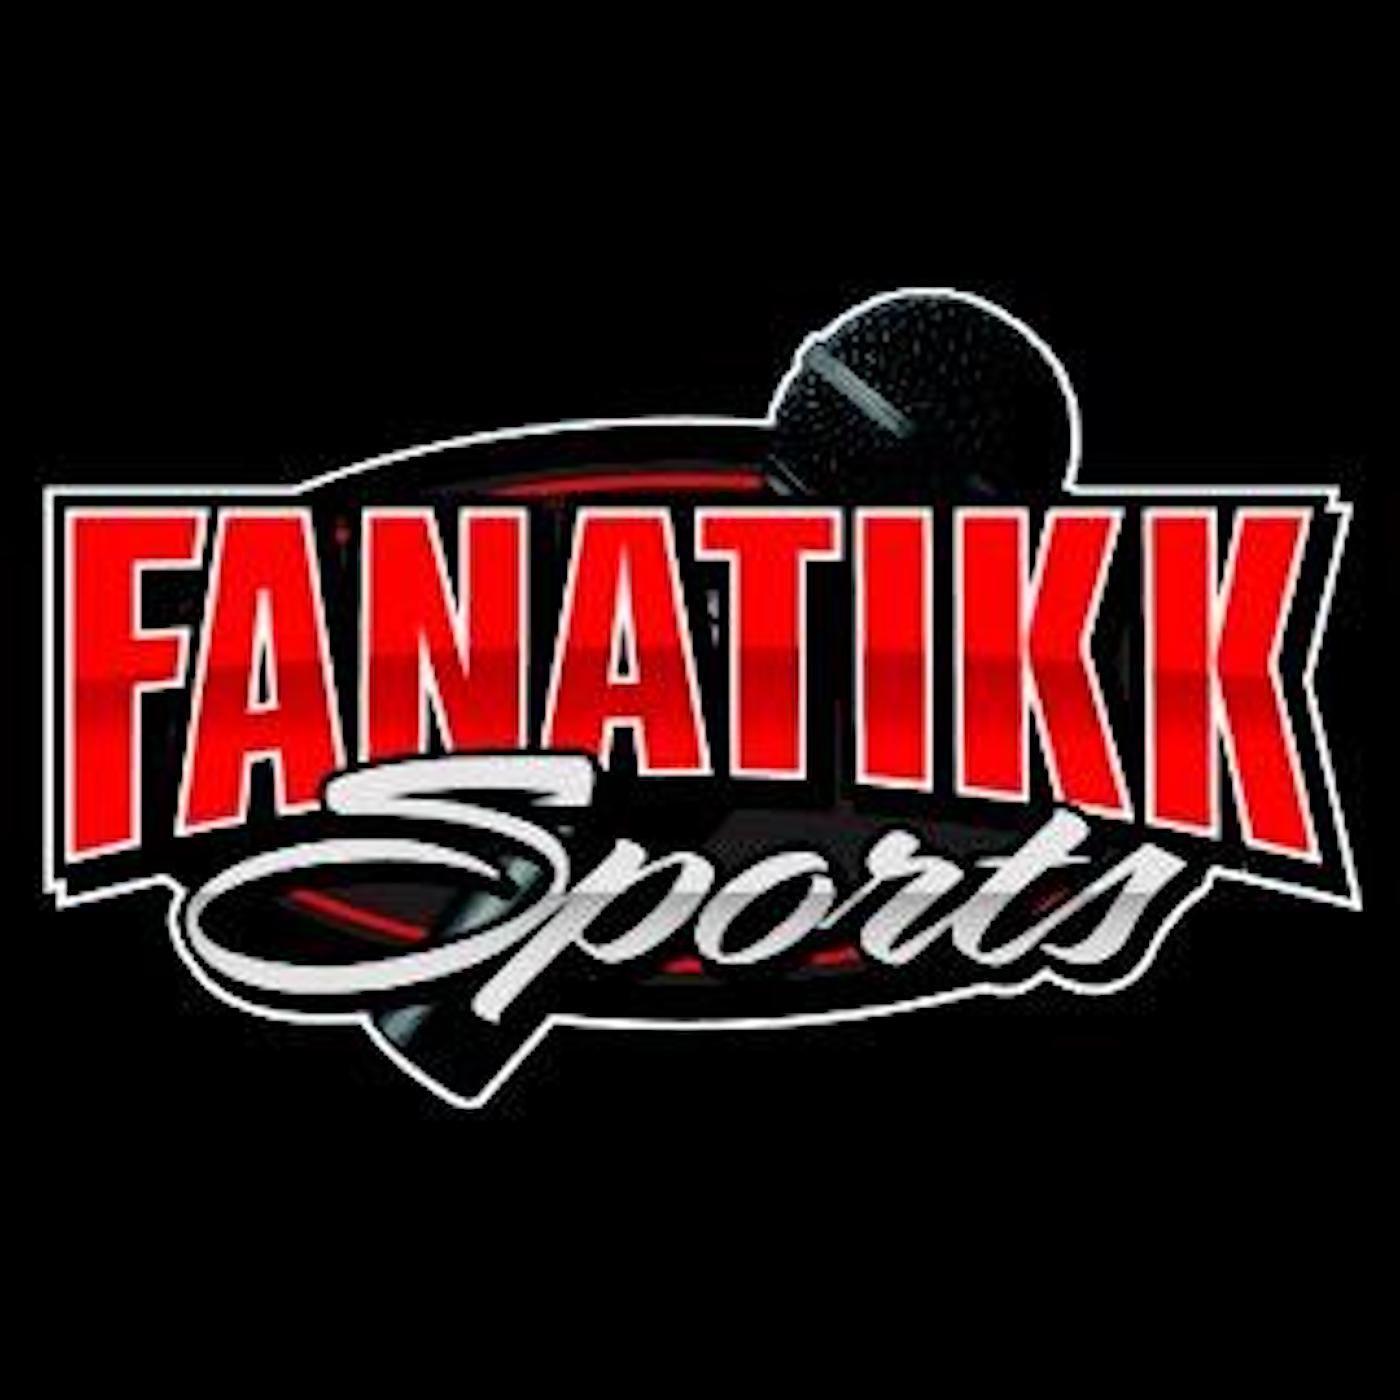 Black Square Sports Logo - Fanatikk Sports by Kevin O'Connell on Apple Podcasts